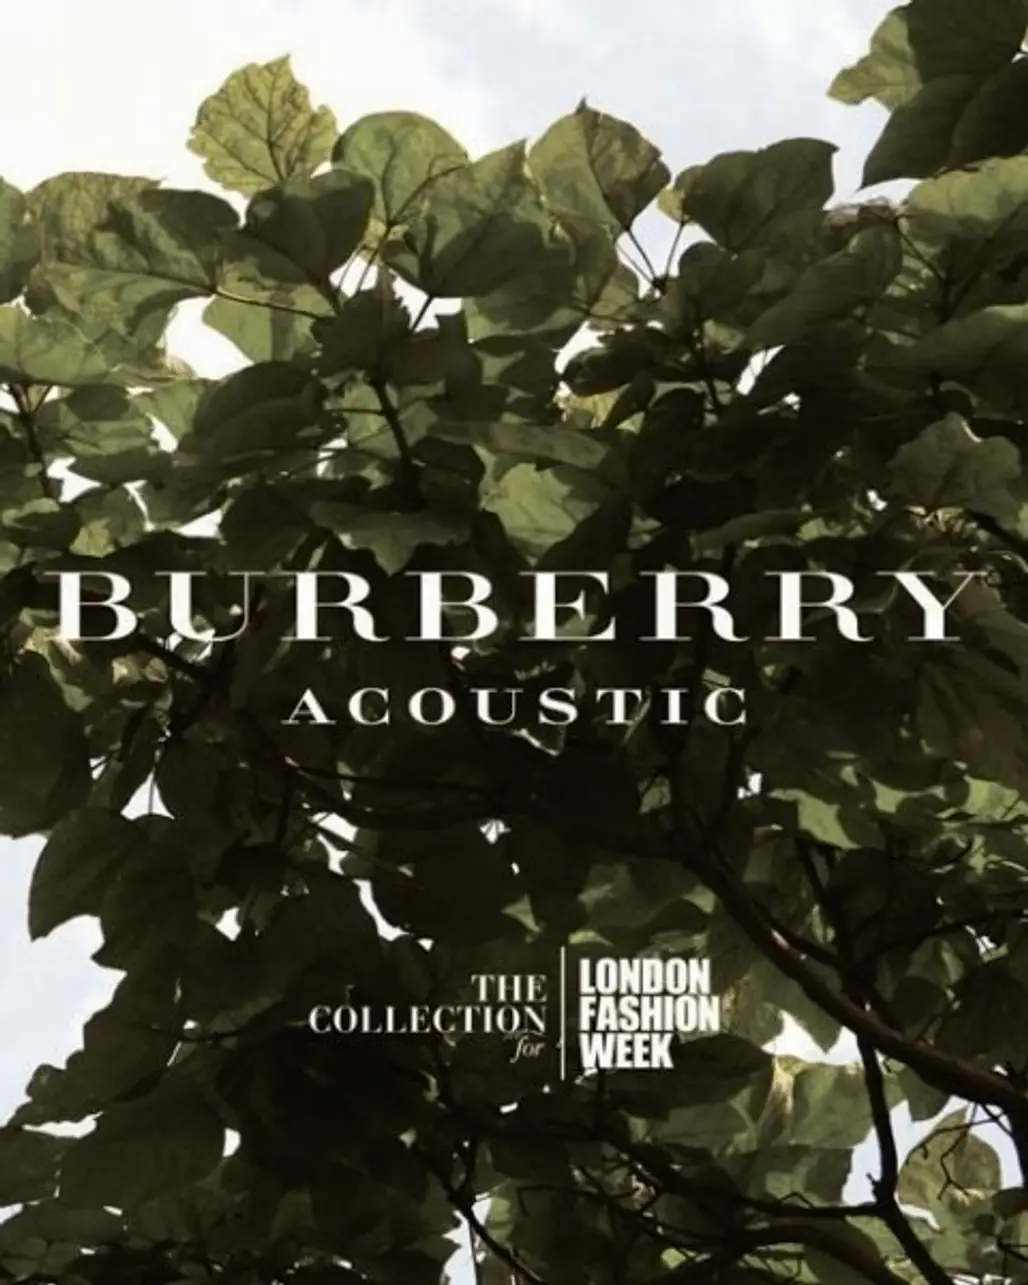 Burberry Acoustic